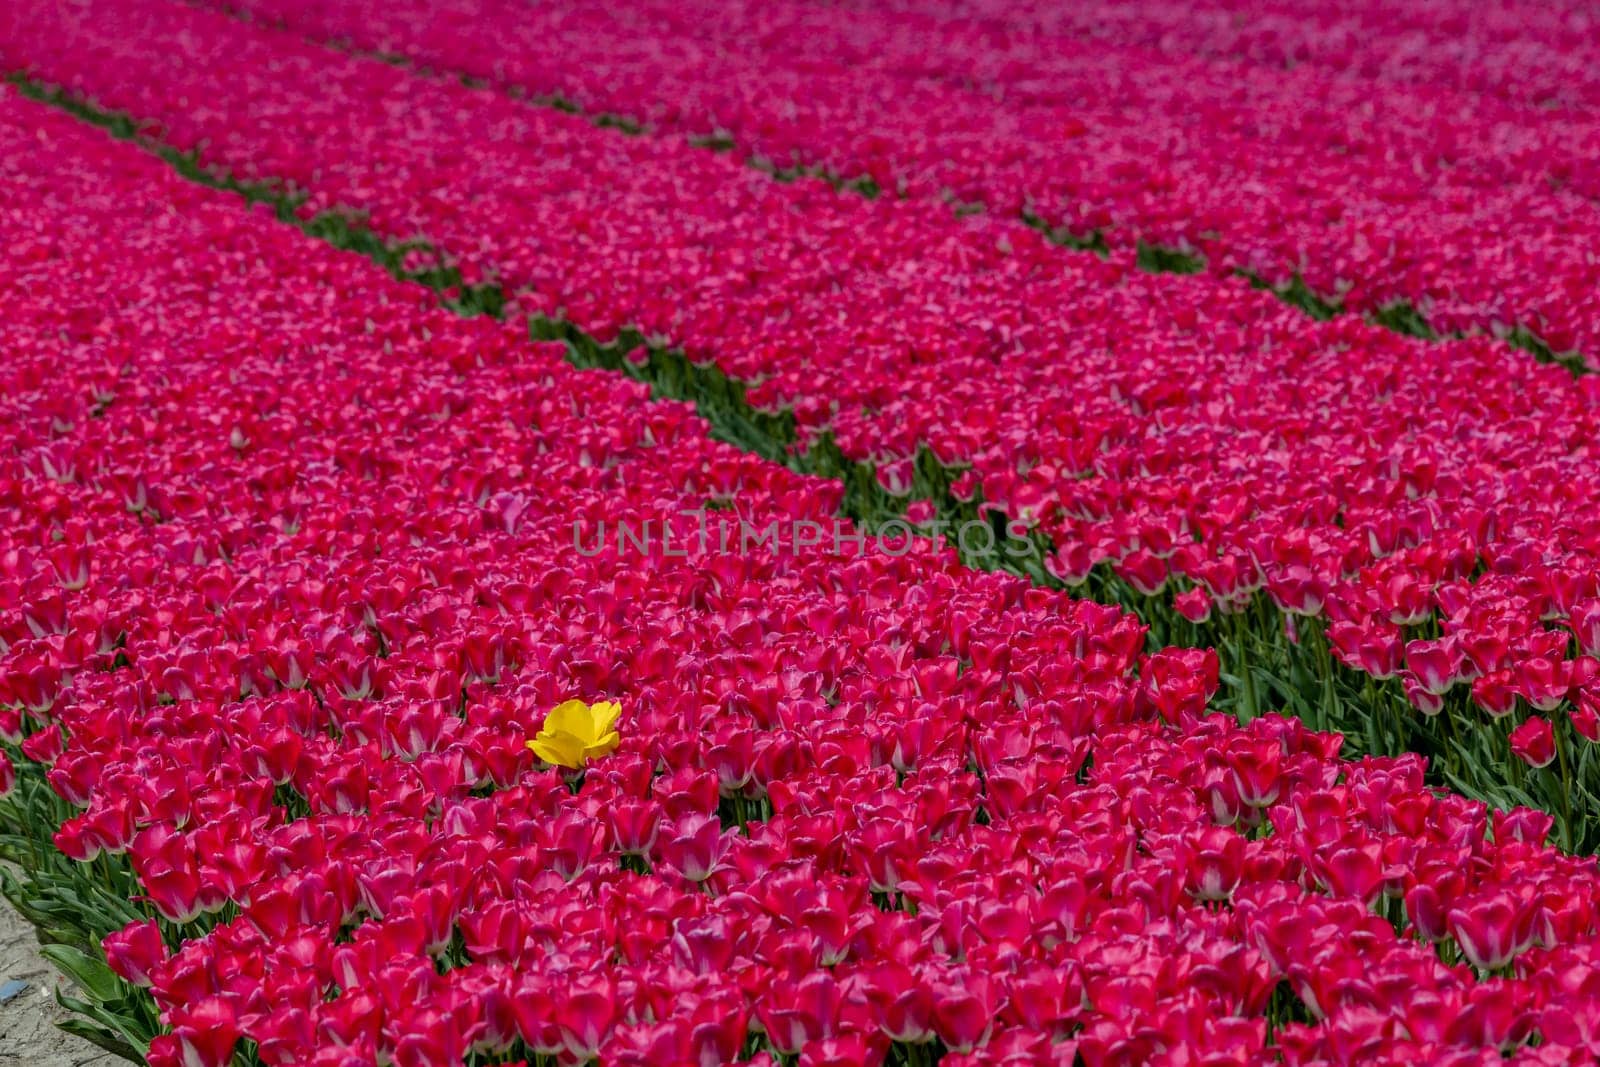 A single vibrant yellow tulip in a field of pink tulips.